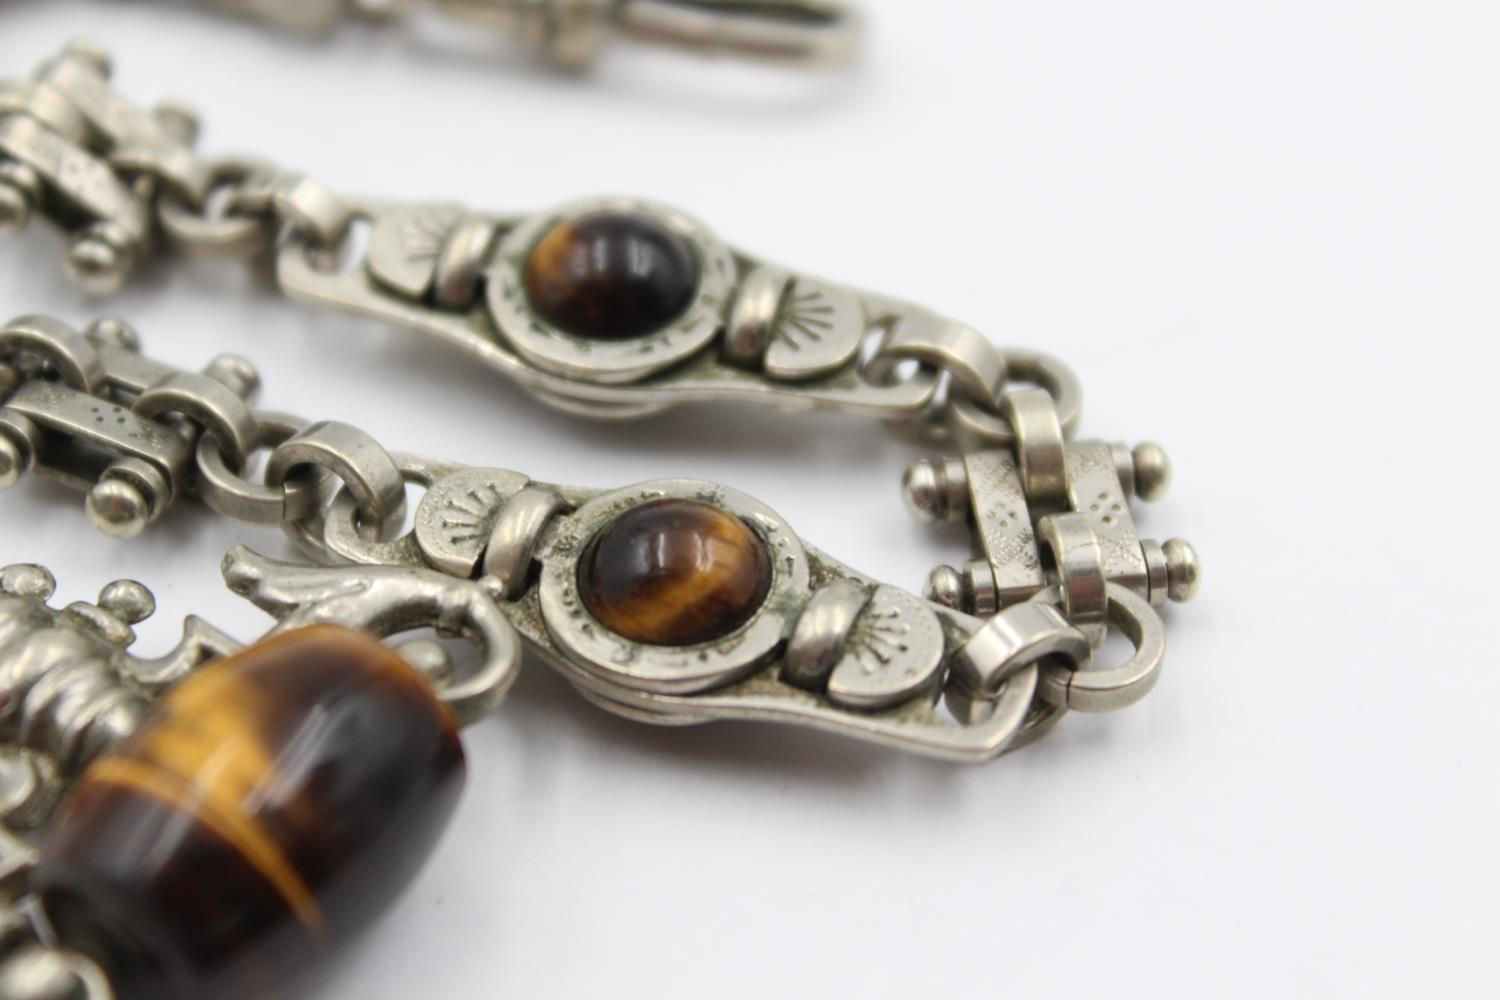 Antique Watch Chain With Tiger's Eye Detail (44g) - Image 4 of 5